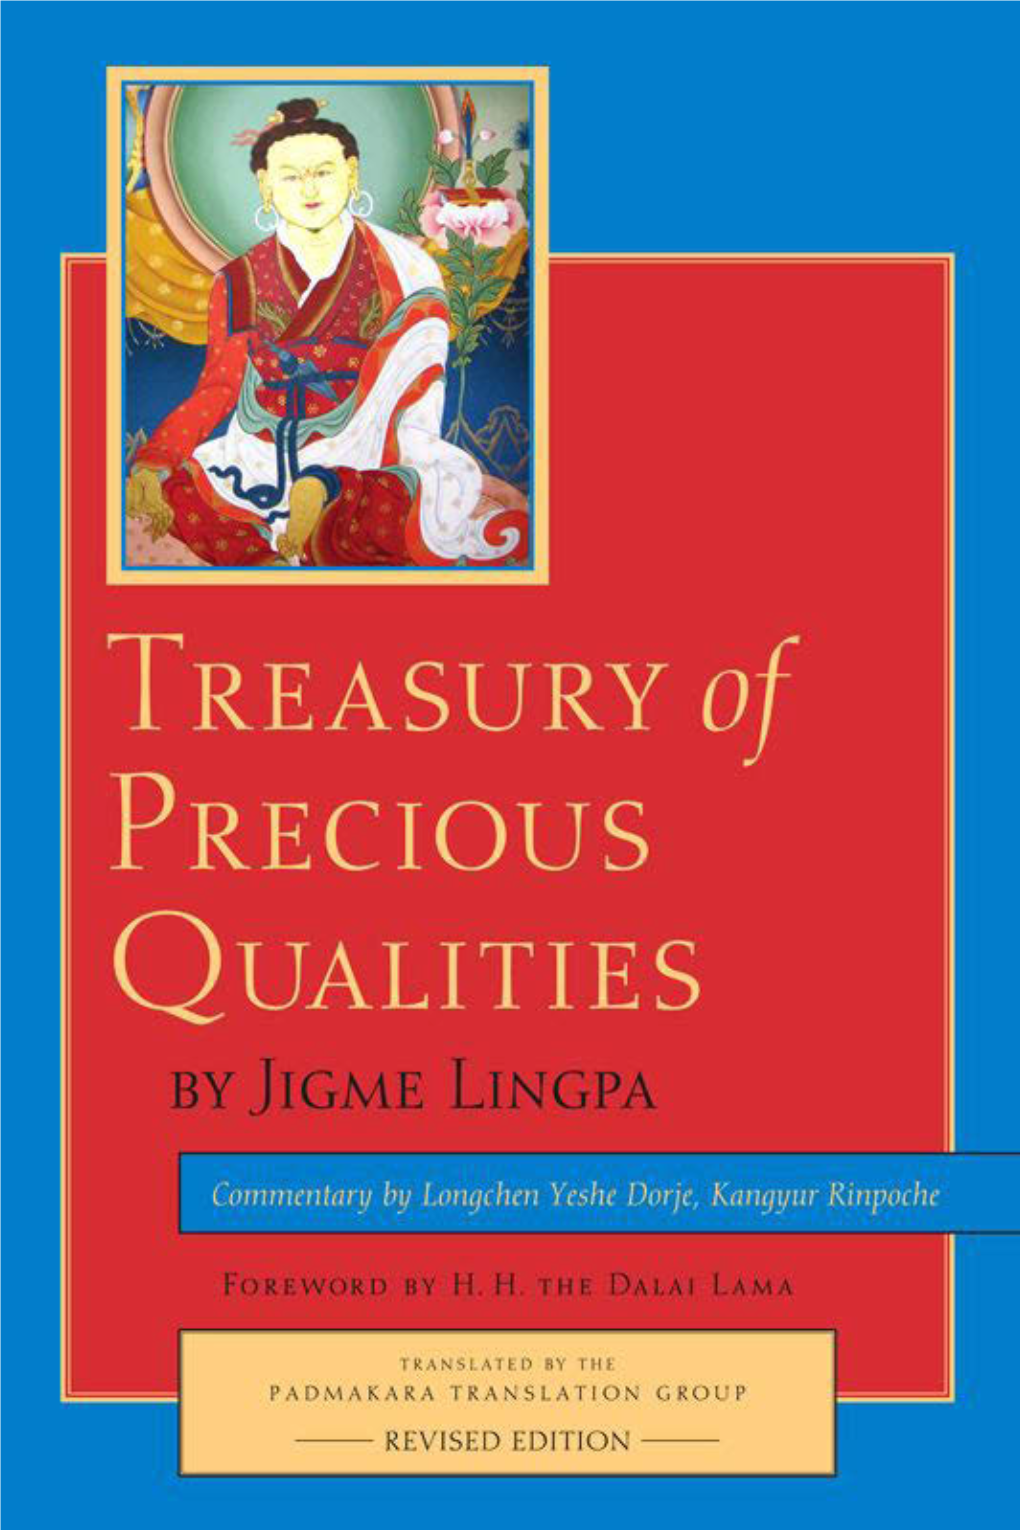 Treasury of Precious Qualities, Which in a Slender Volume of Elegant Verses Sets out Briefly but Comprehensively the Buddhist Path According to the Nyingma School